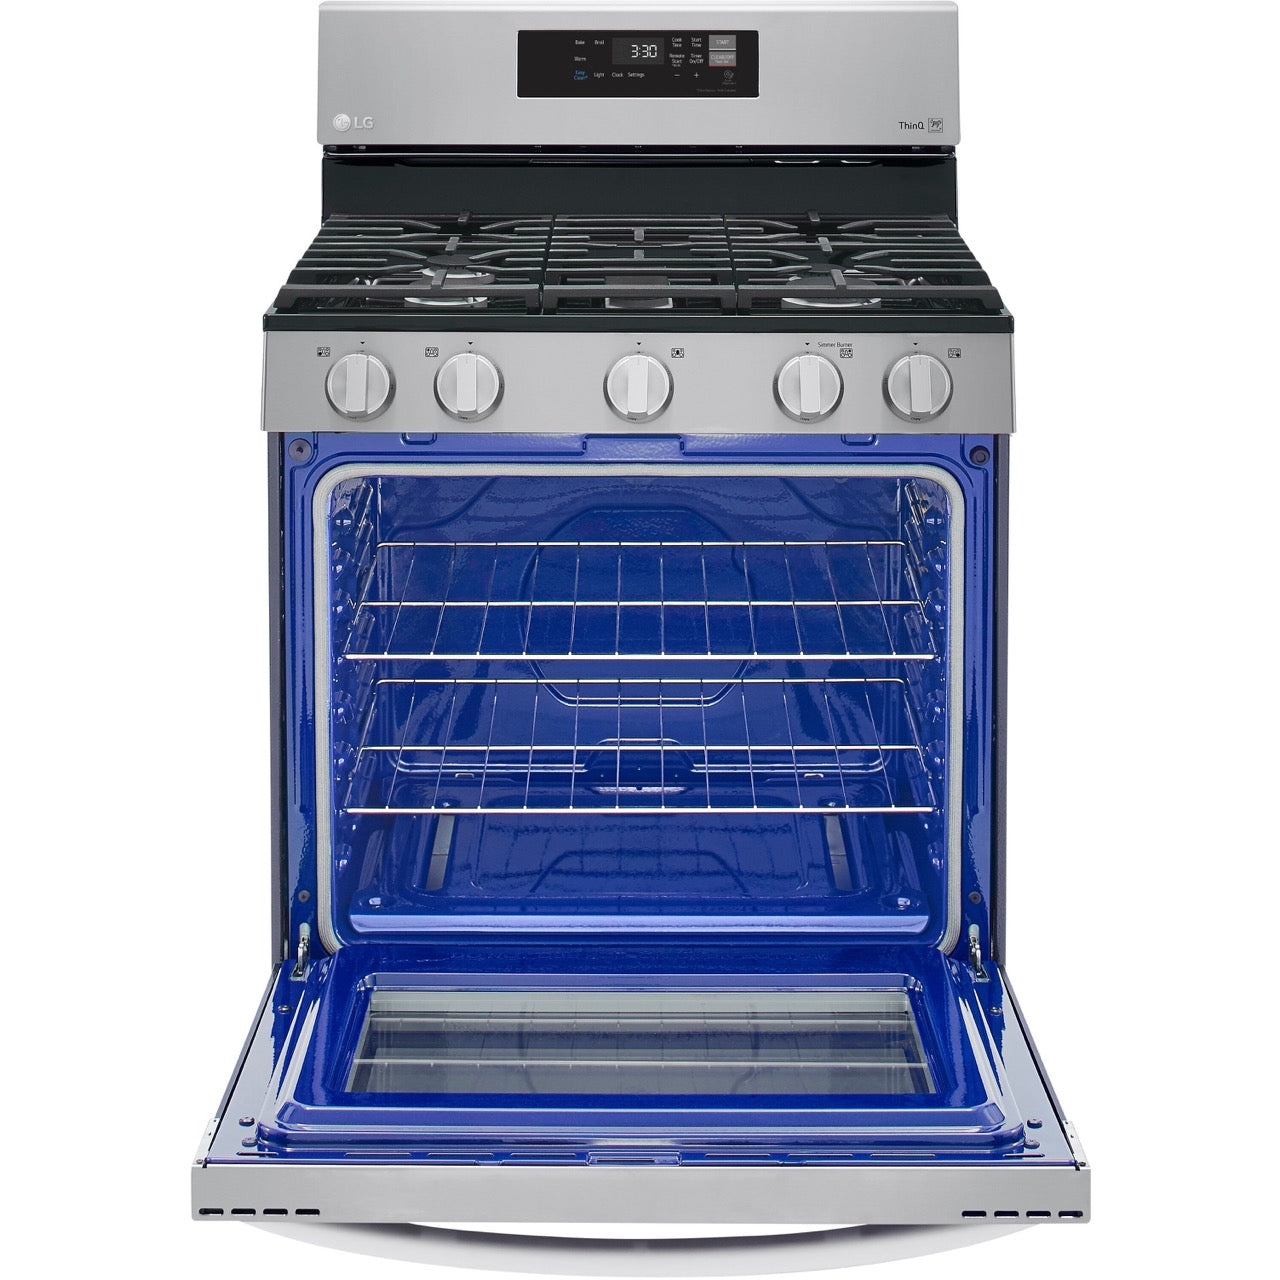 LG 5.8-Cu. Ft. Gas Smart Range with EasyClean, Stainless Steel (LRGL5821S)